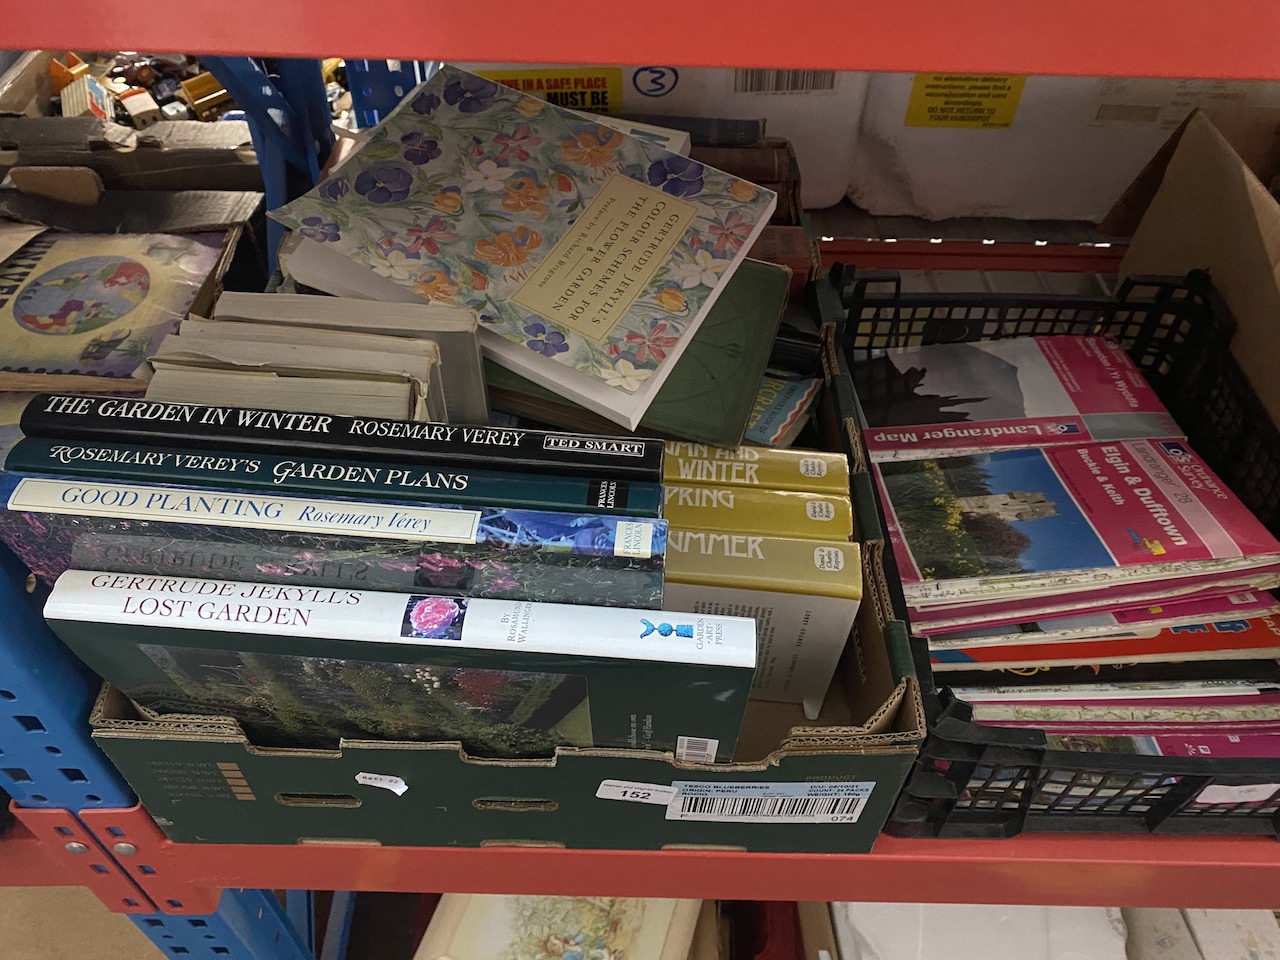 Two boxes of assorted books including Geology, Gardening, OS maps etc.